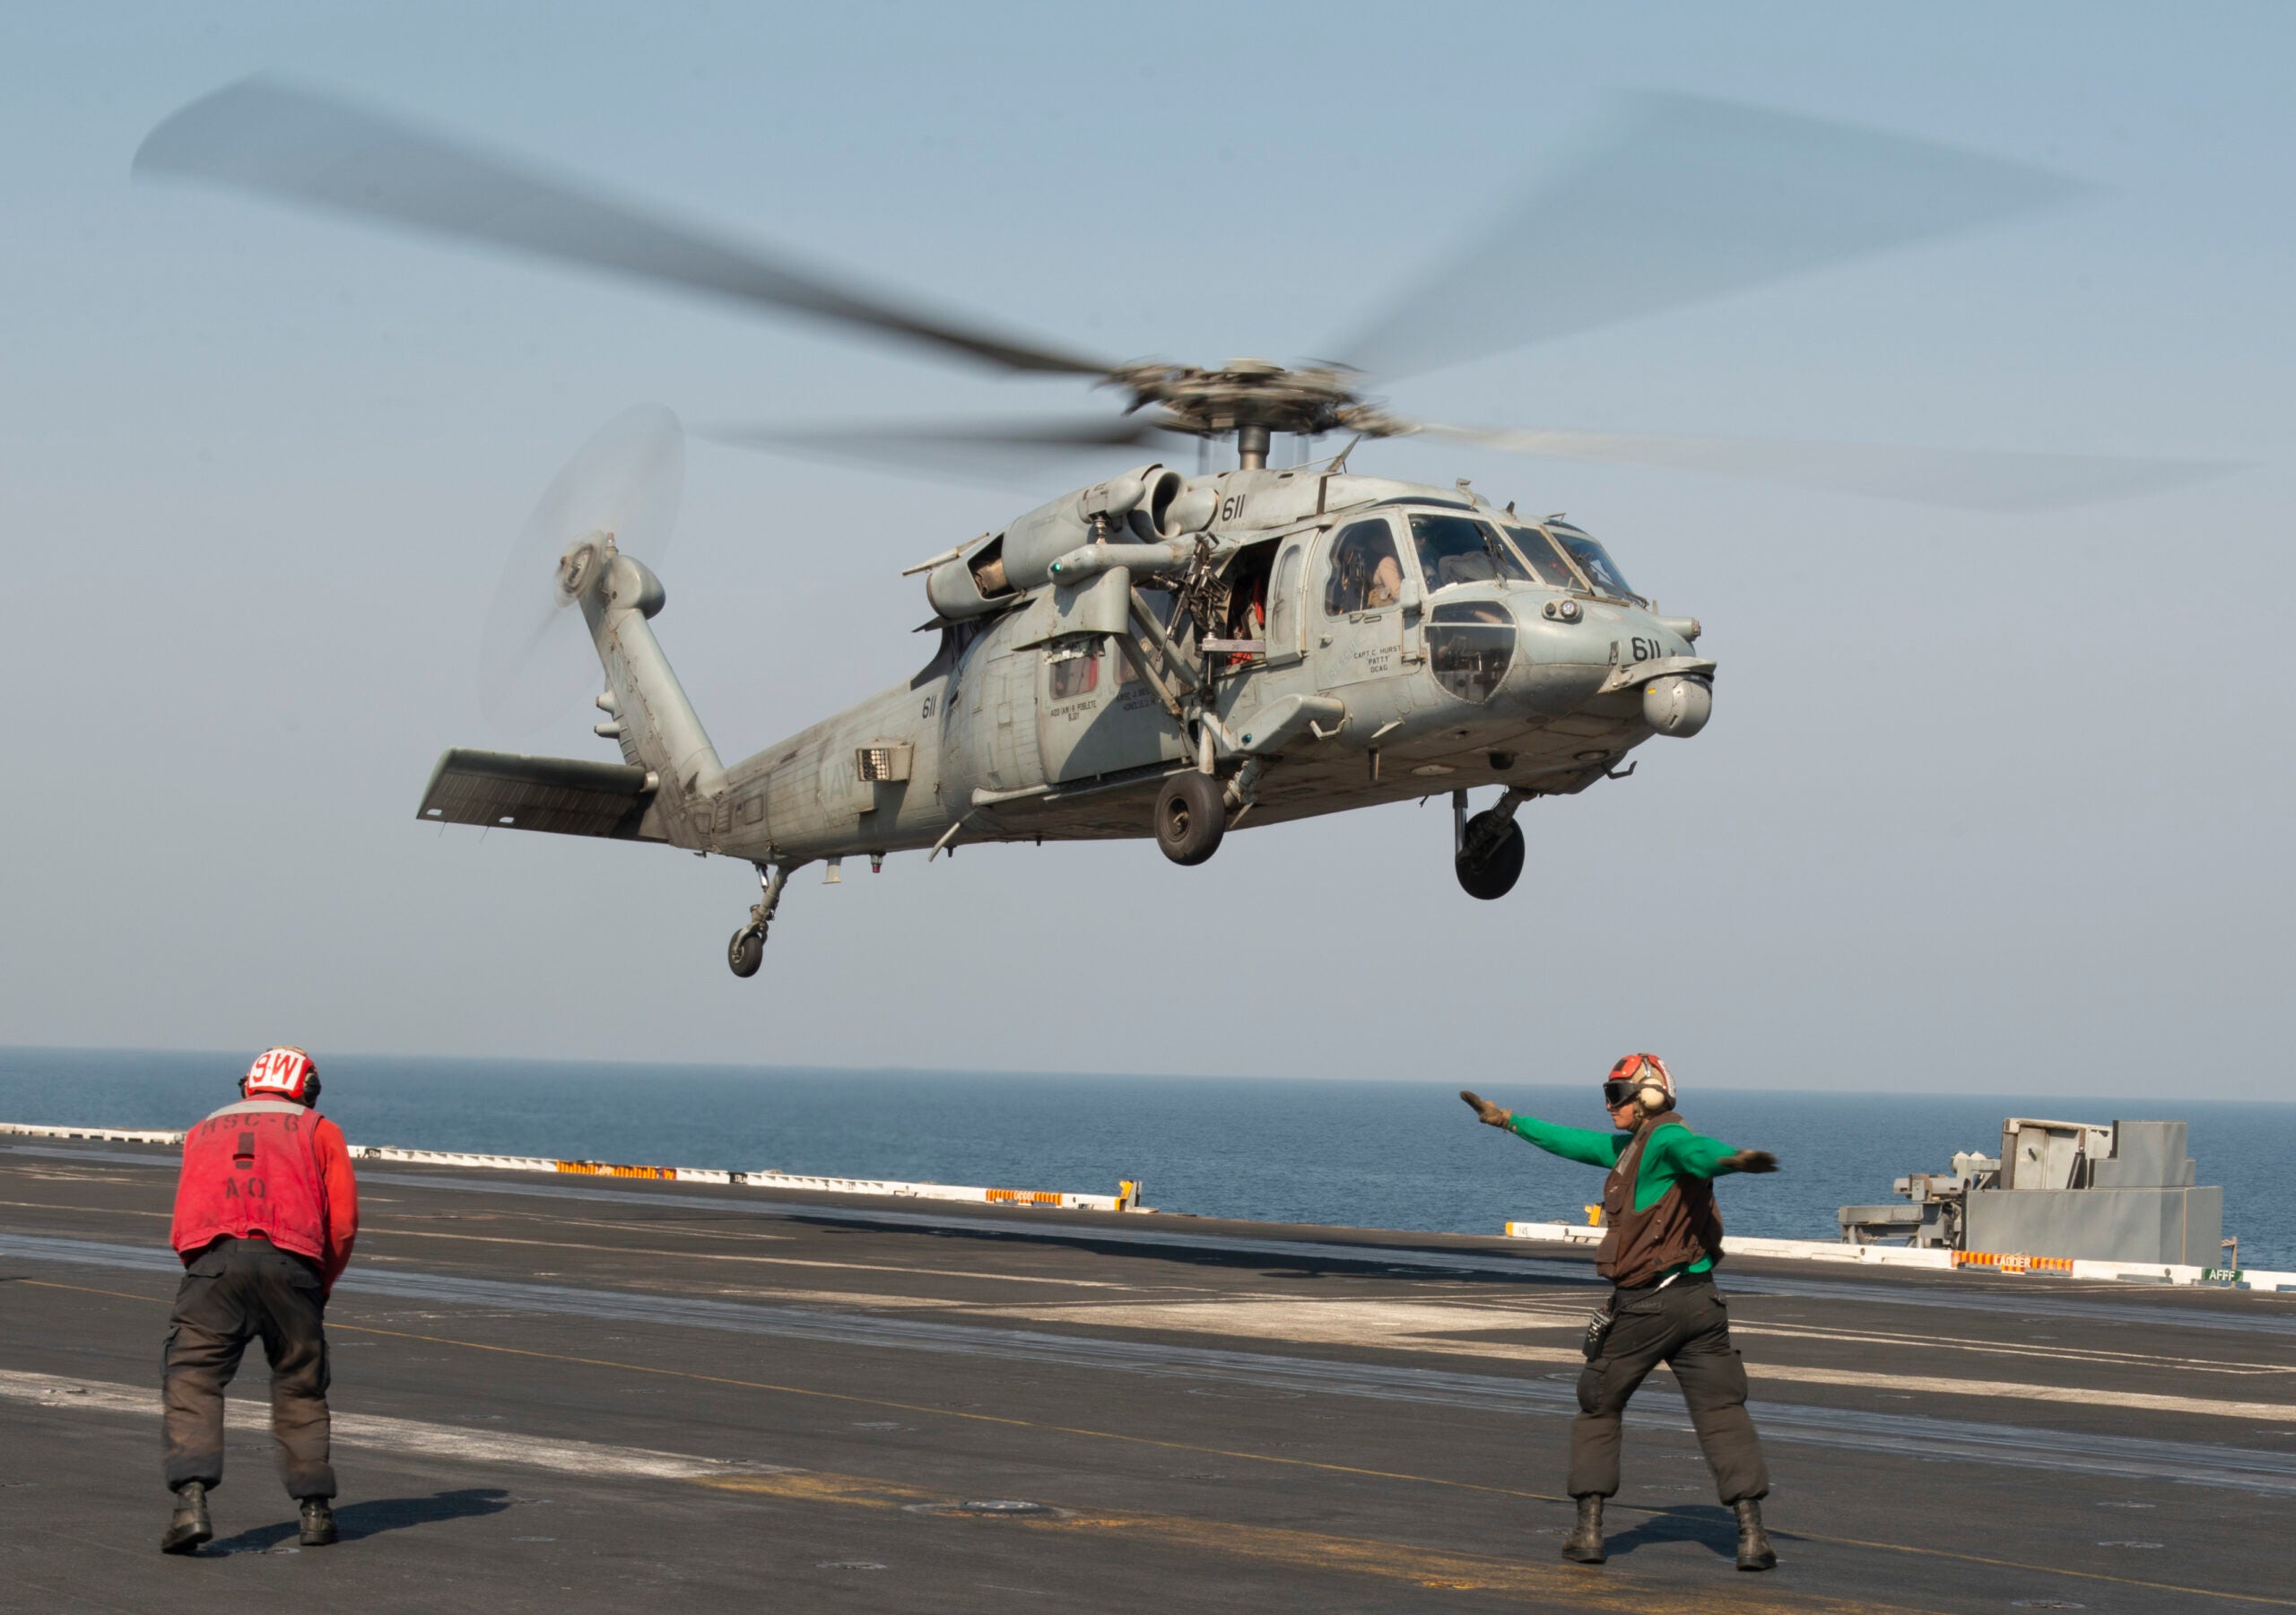 ARABIAN GULF (Oct. 28, 2020) An MH-60S Sea Hawk helicopter, from the "Screamin' Indians" of Helicopter Sea Combat Squadron (HSC) 6, lifts off the flight deck of the aircraft carrier USS Nimitz (CVN 68). Nimitz, the flagship of Nimitz Carrier Strike Group, is deployed to the U.S. 5th Fleet area of operations, conducting missions in support of Operation Inherent Resolve, and maritime security operations alongside regional and coalition partners. (U.S. Navy photo by Mass Communication Seaman Bryant Lang)